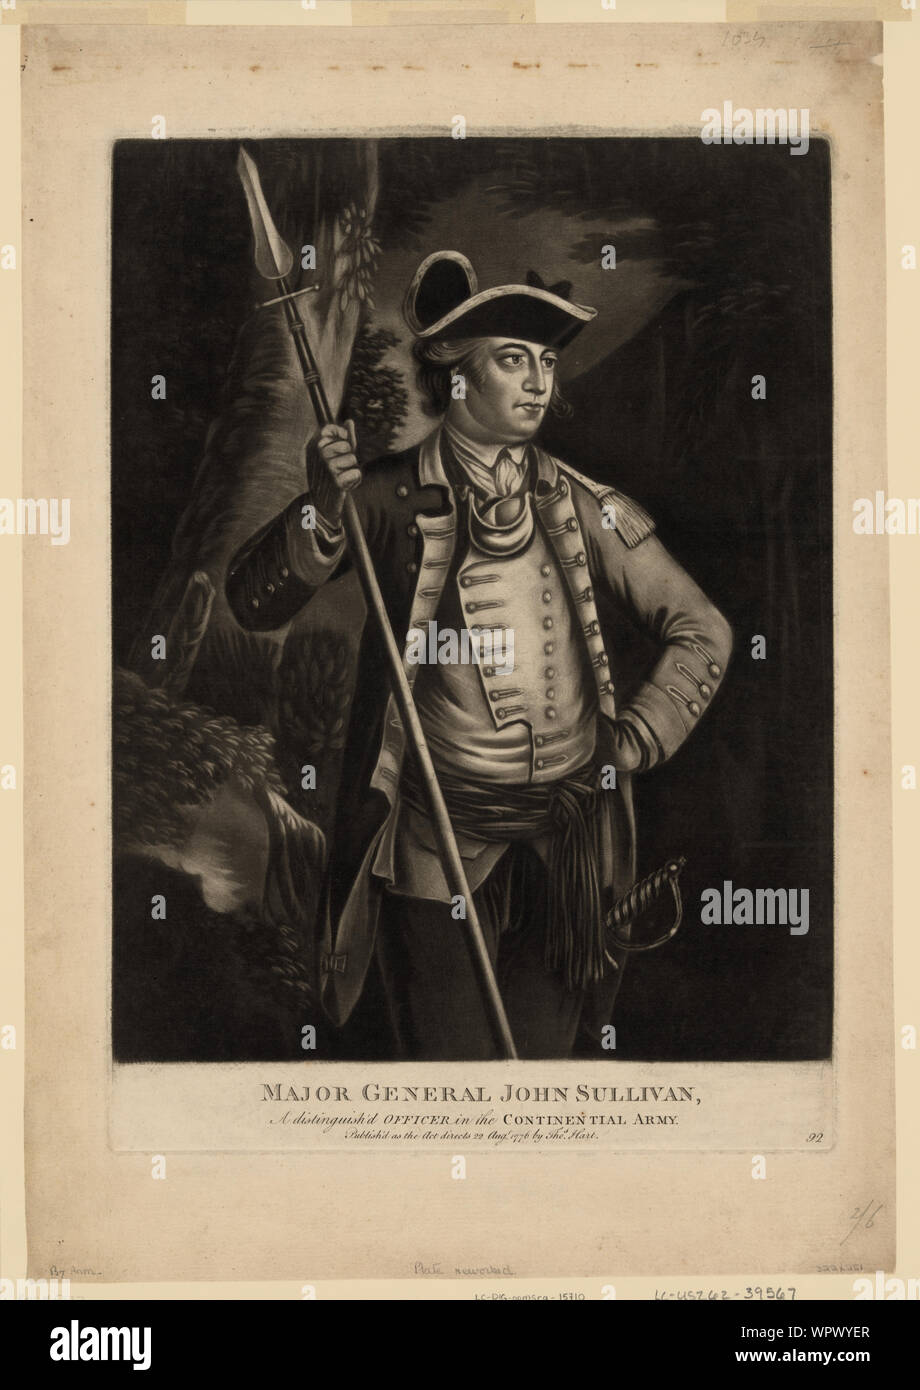 Major general John Sullivan, a distinguish'd officer in the Continential [sic] Army Abstract: Print shows John Sullivan, three-quarter length portrait, wearing military uniform, standing, facing right, holding spear in right hand, left hand on hip. Stock Photo